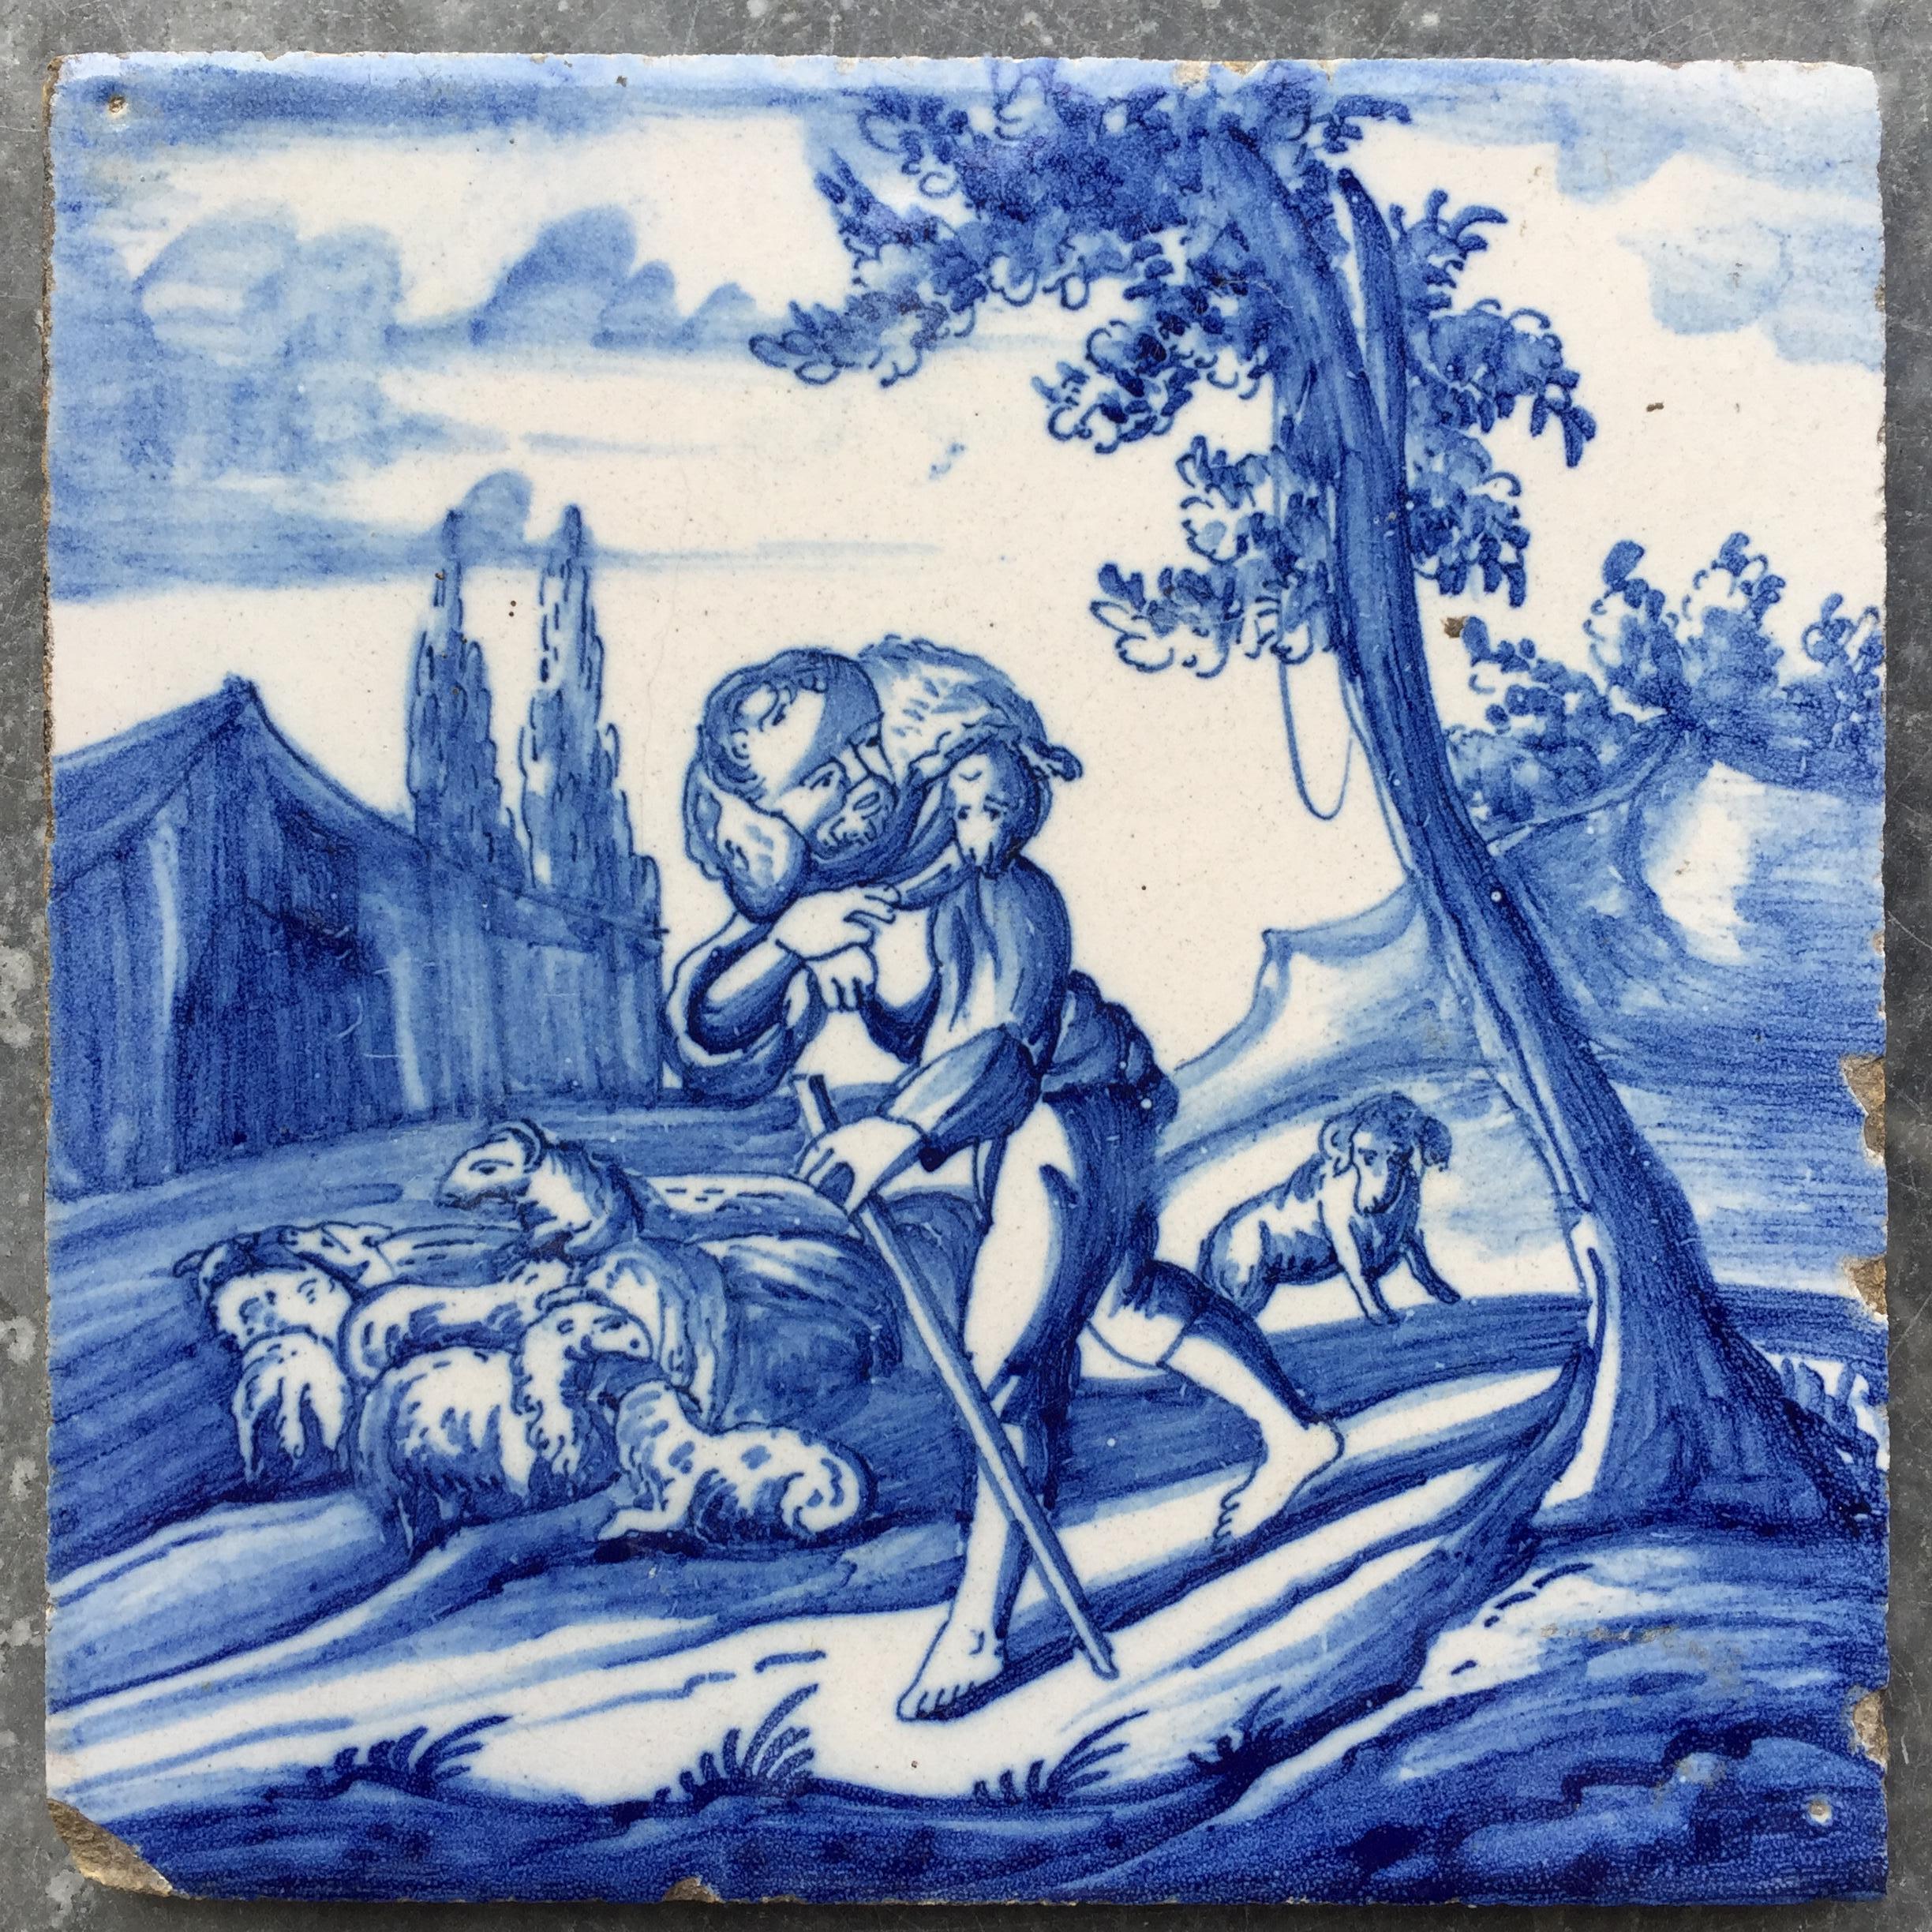 The Netherlands
Rotterdam
Circa 1720 - 1740

An unusually fine painted religious 'open air' tile with deep shades of blue and a shining glaze, decorated with the story of the lost sheep. Luc 15: 1 t/m 10.
The execution of this biblical tile is